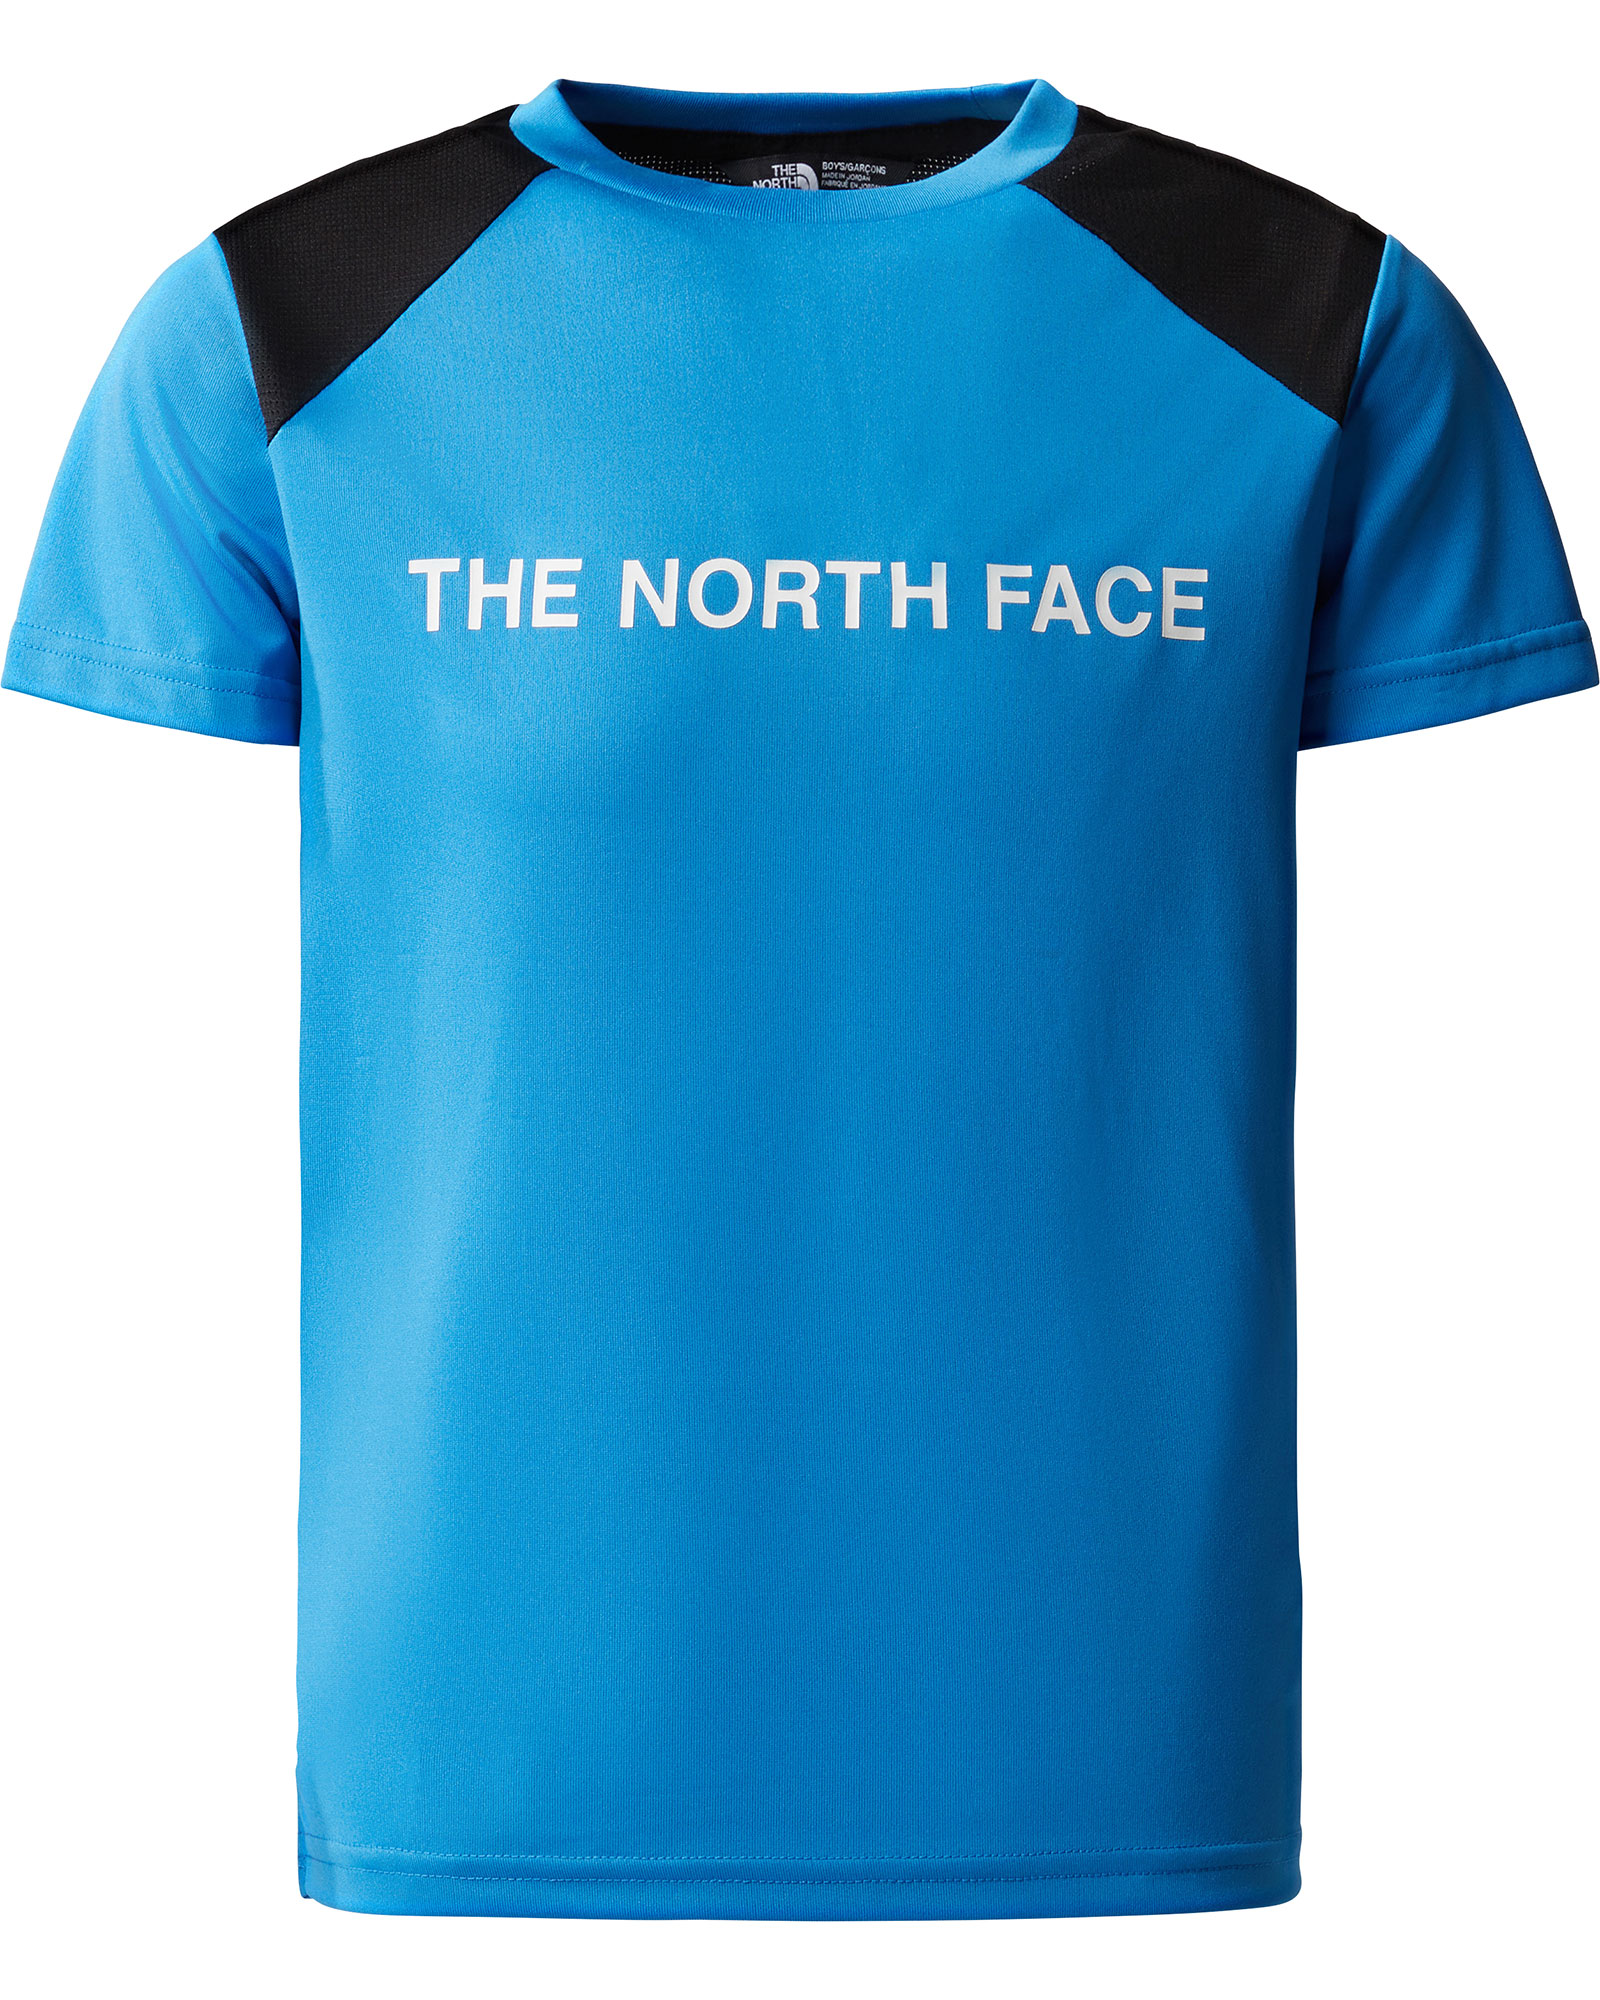 The North Face Boy’s Never Stop T Shirt - Super Sonic Blue S